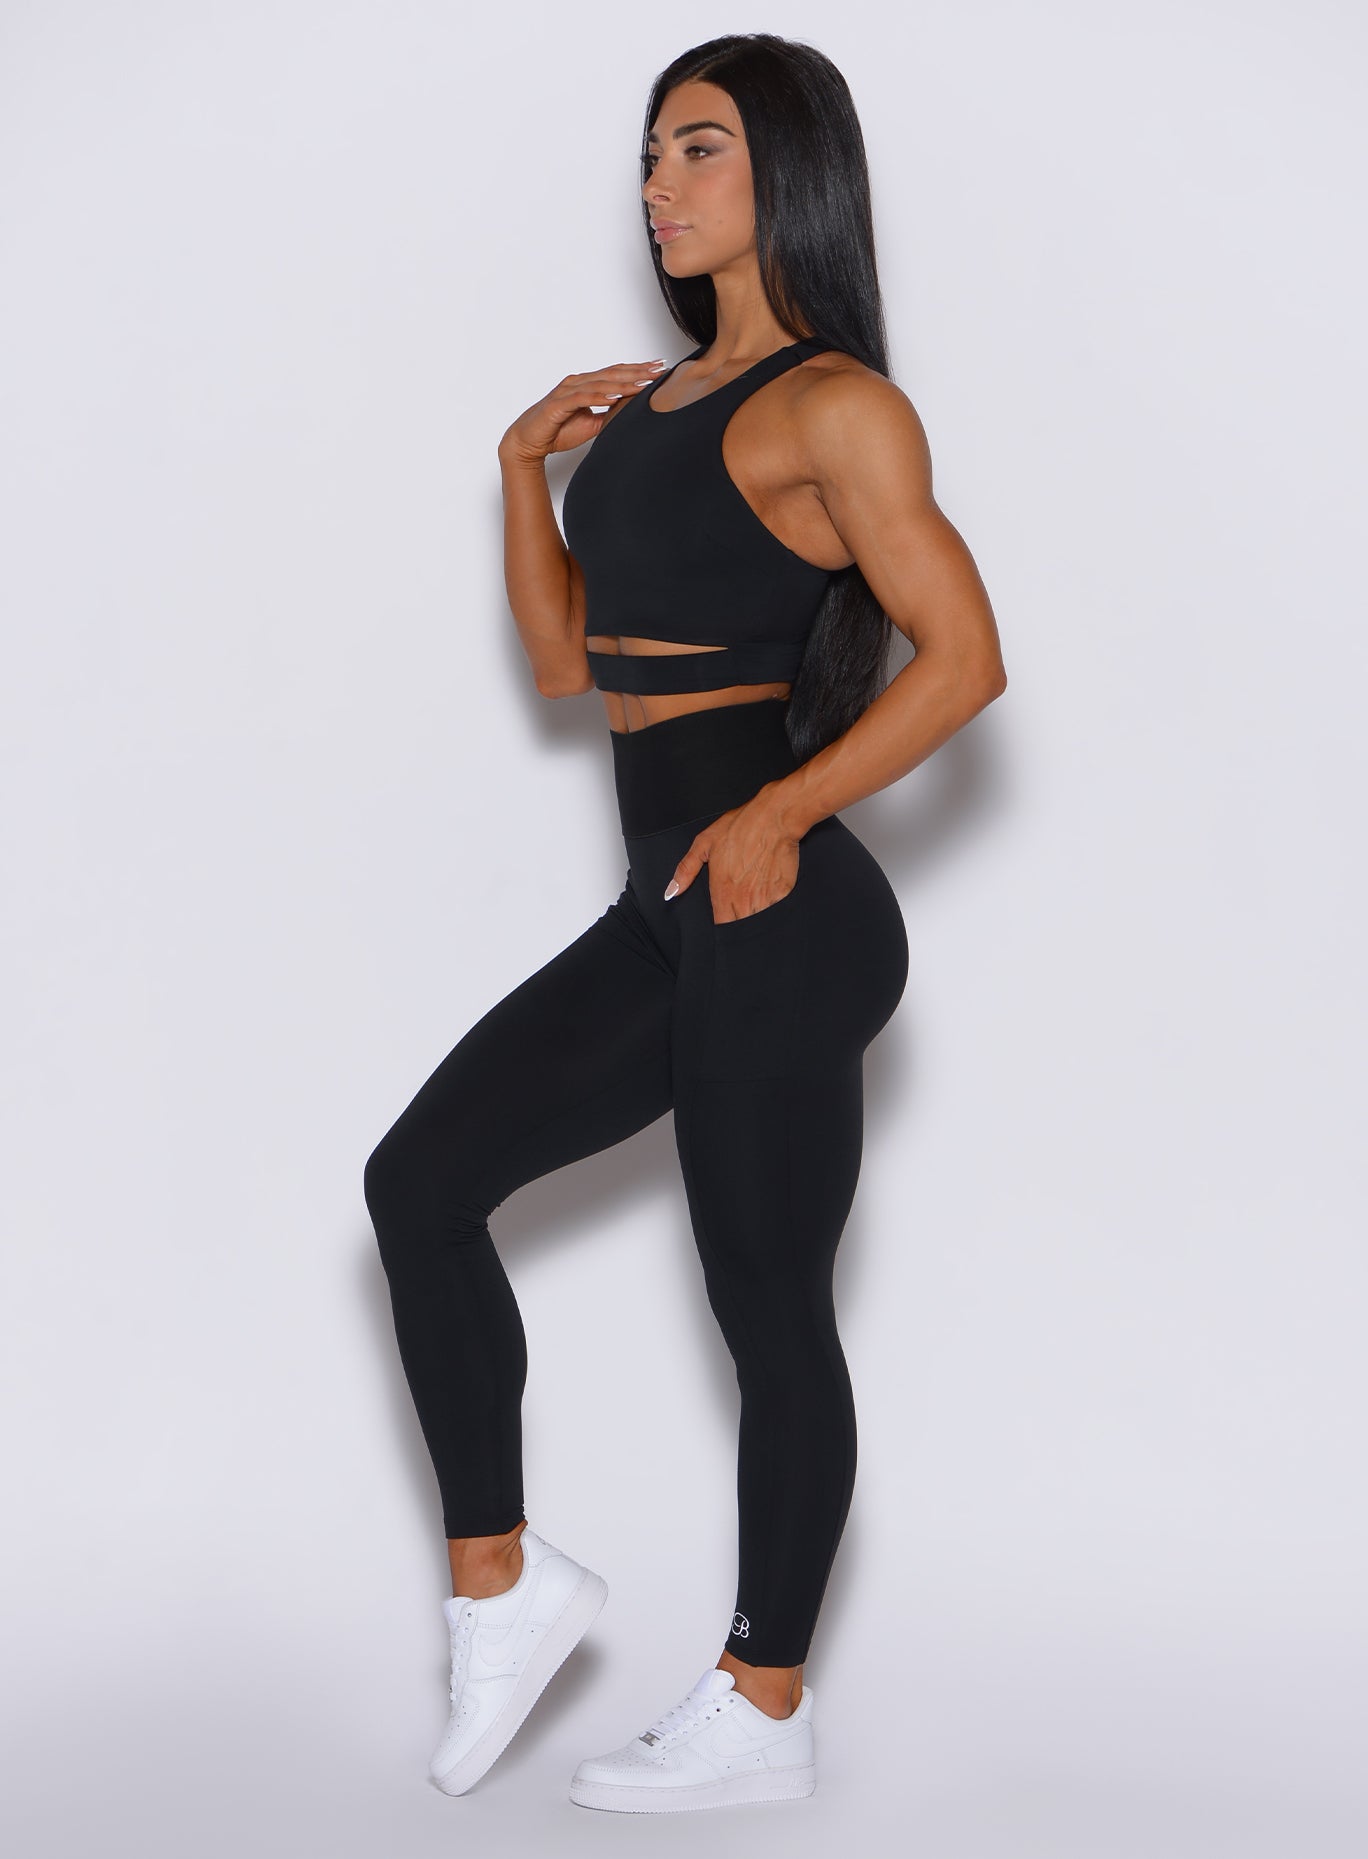 left side profile view of a model wearing our black cincher leggings and a matching top